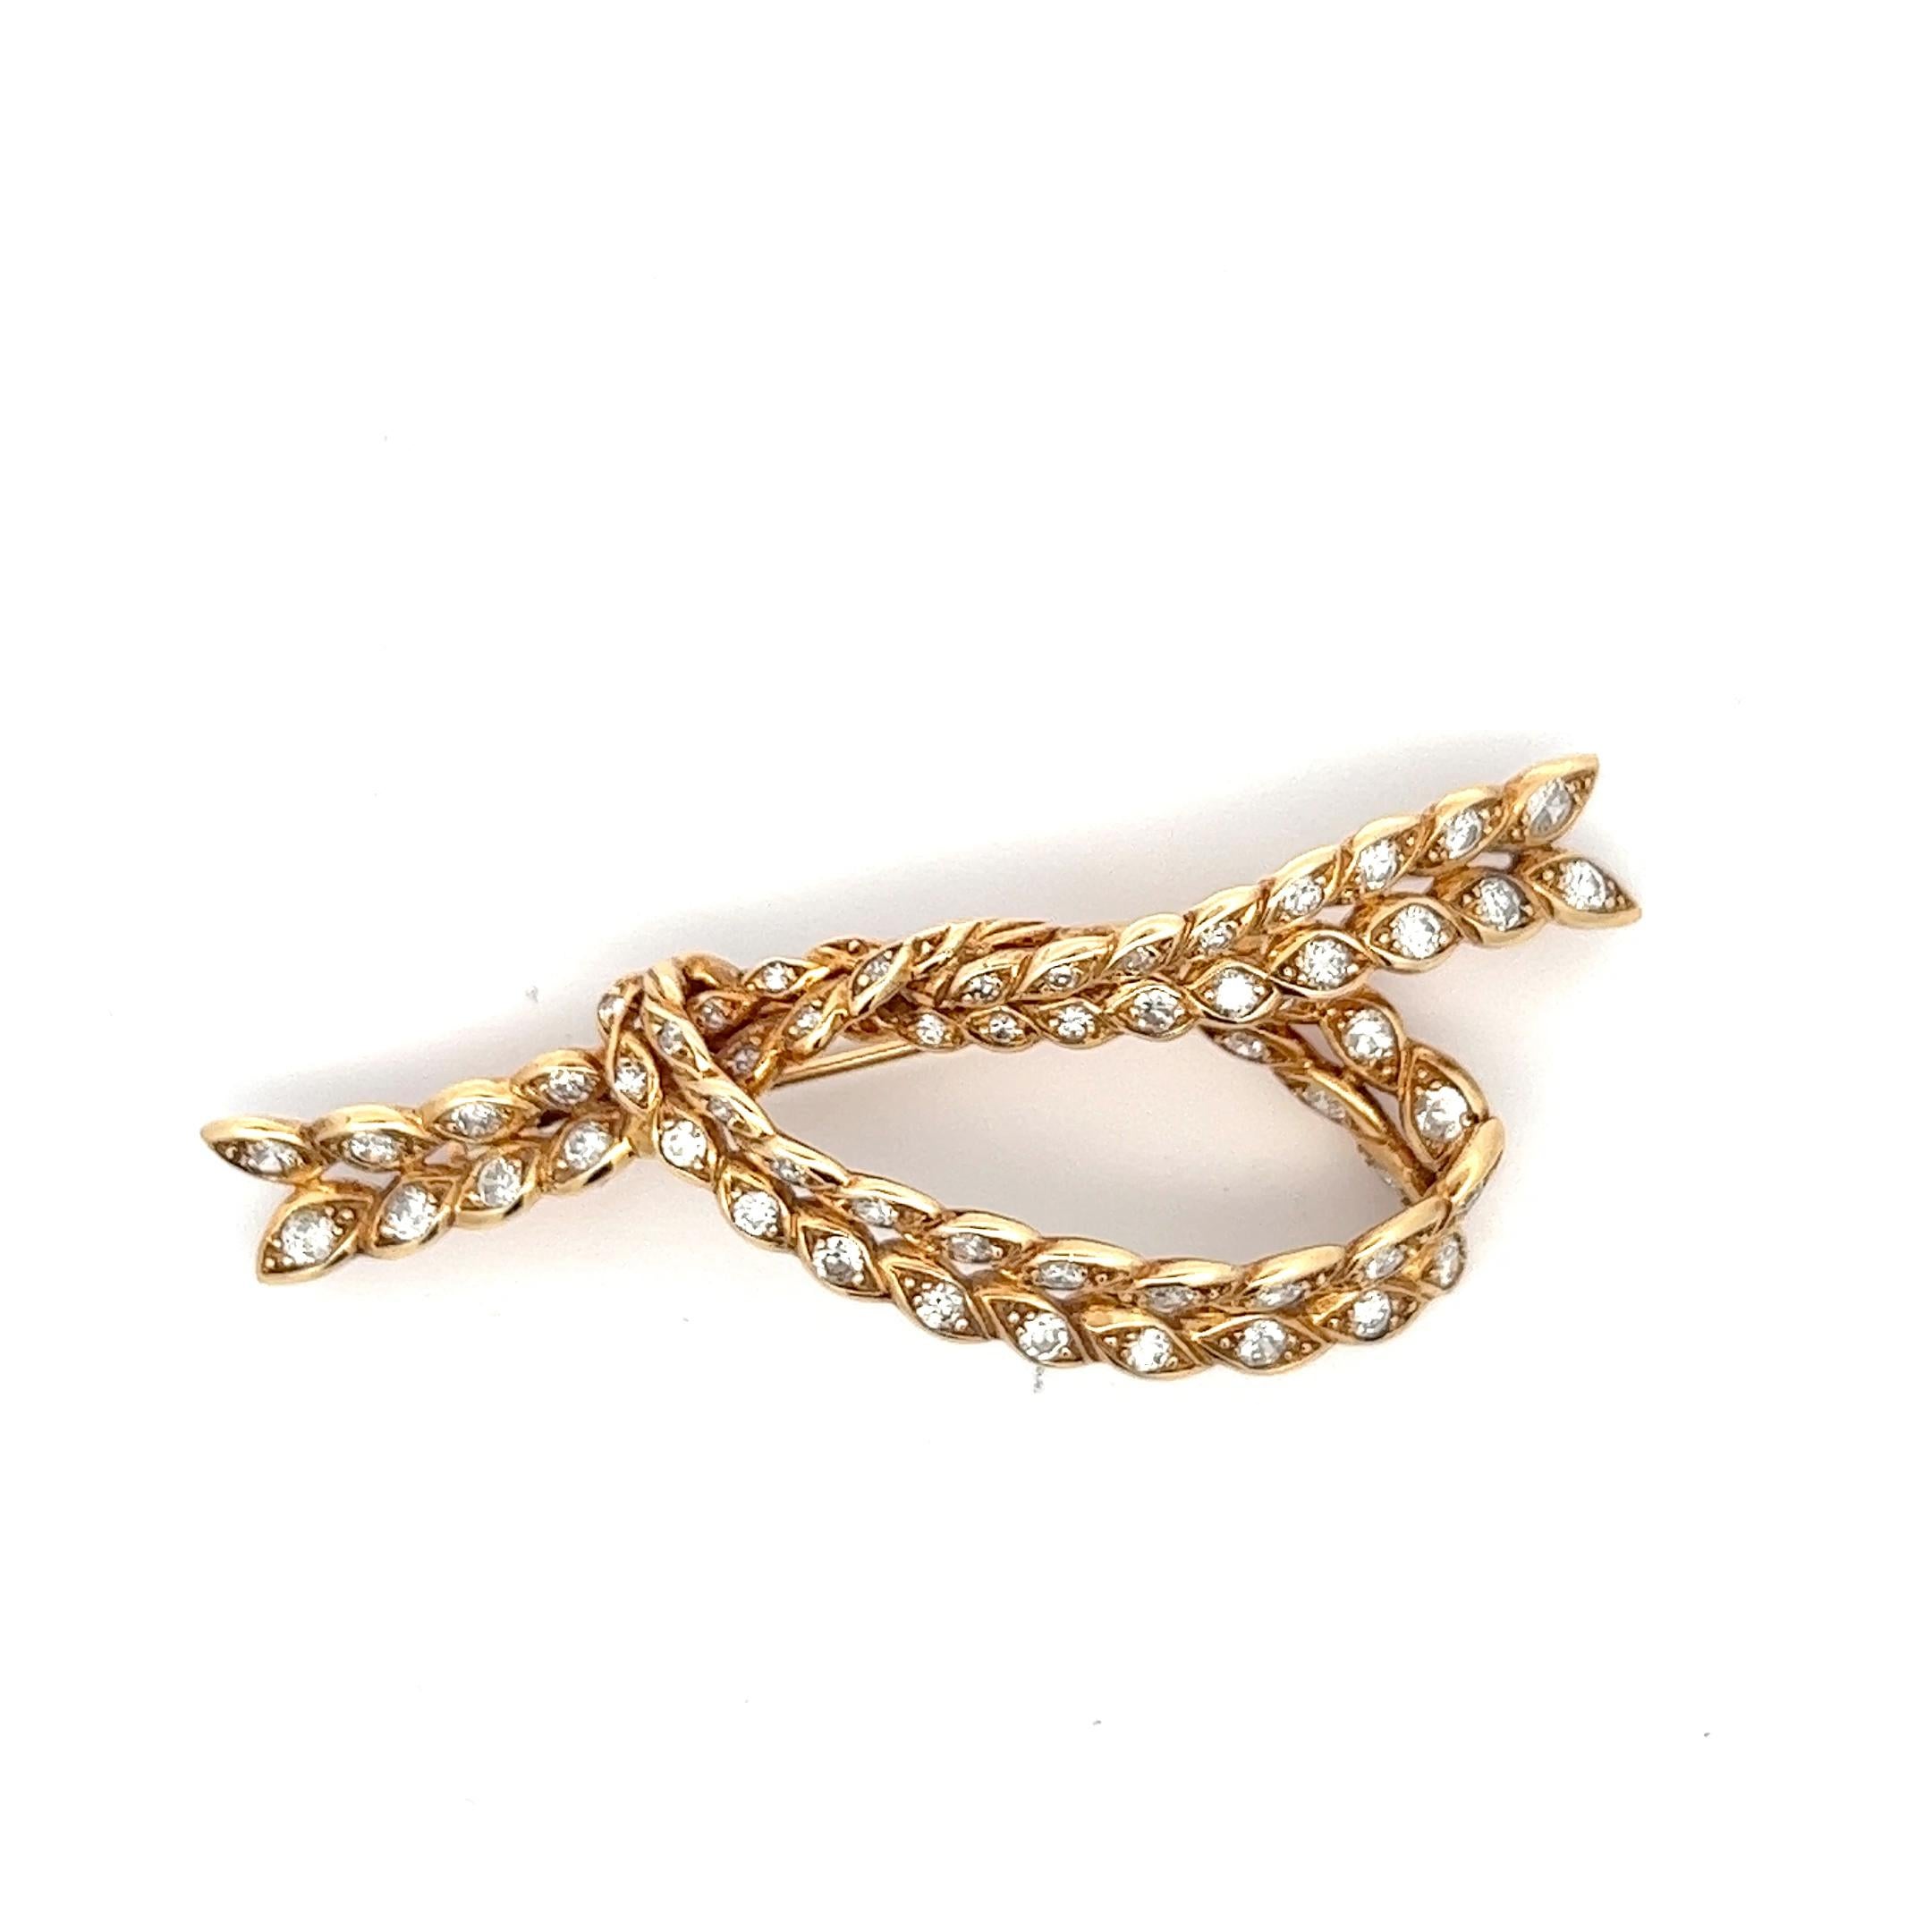 An 18k yellow gold bow brooch by Sterlé.
The brooch was made in France, circa 1960.
Total Diamond weight: circa 3.8ct.

The brooch measures circa 7 by 3 cm.

The brooch is marked with the French hallmark for 18k gold.
Signed: Sterlé. Stamped with